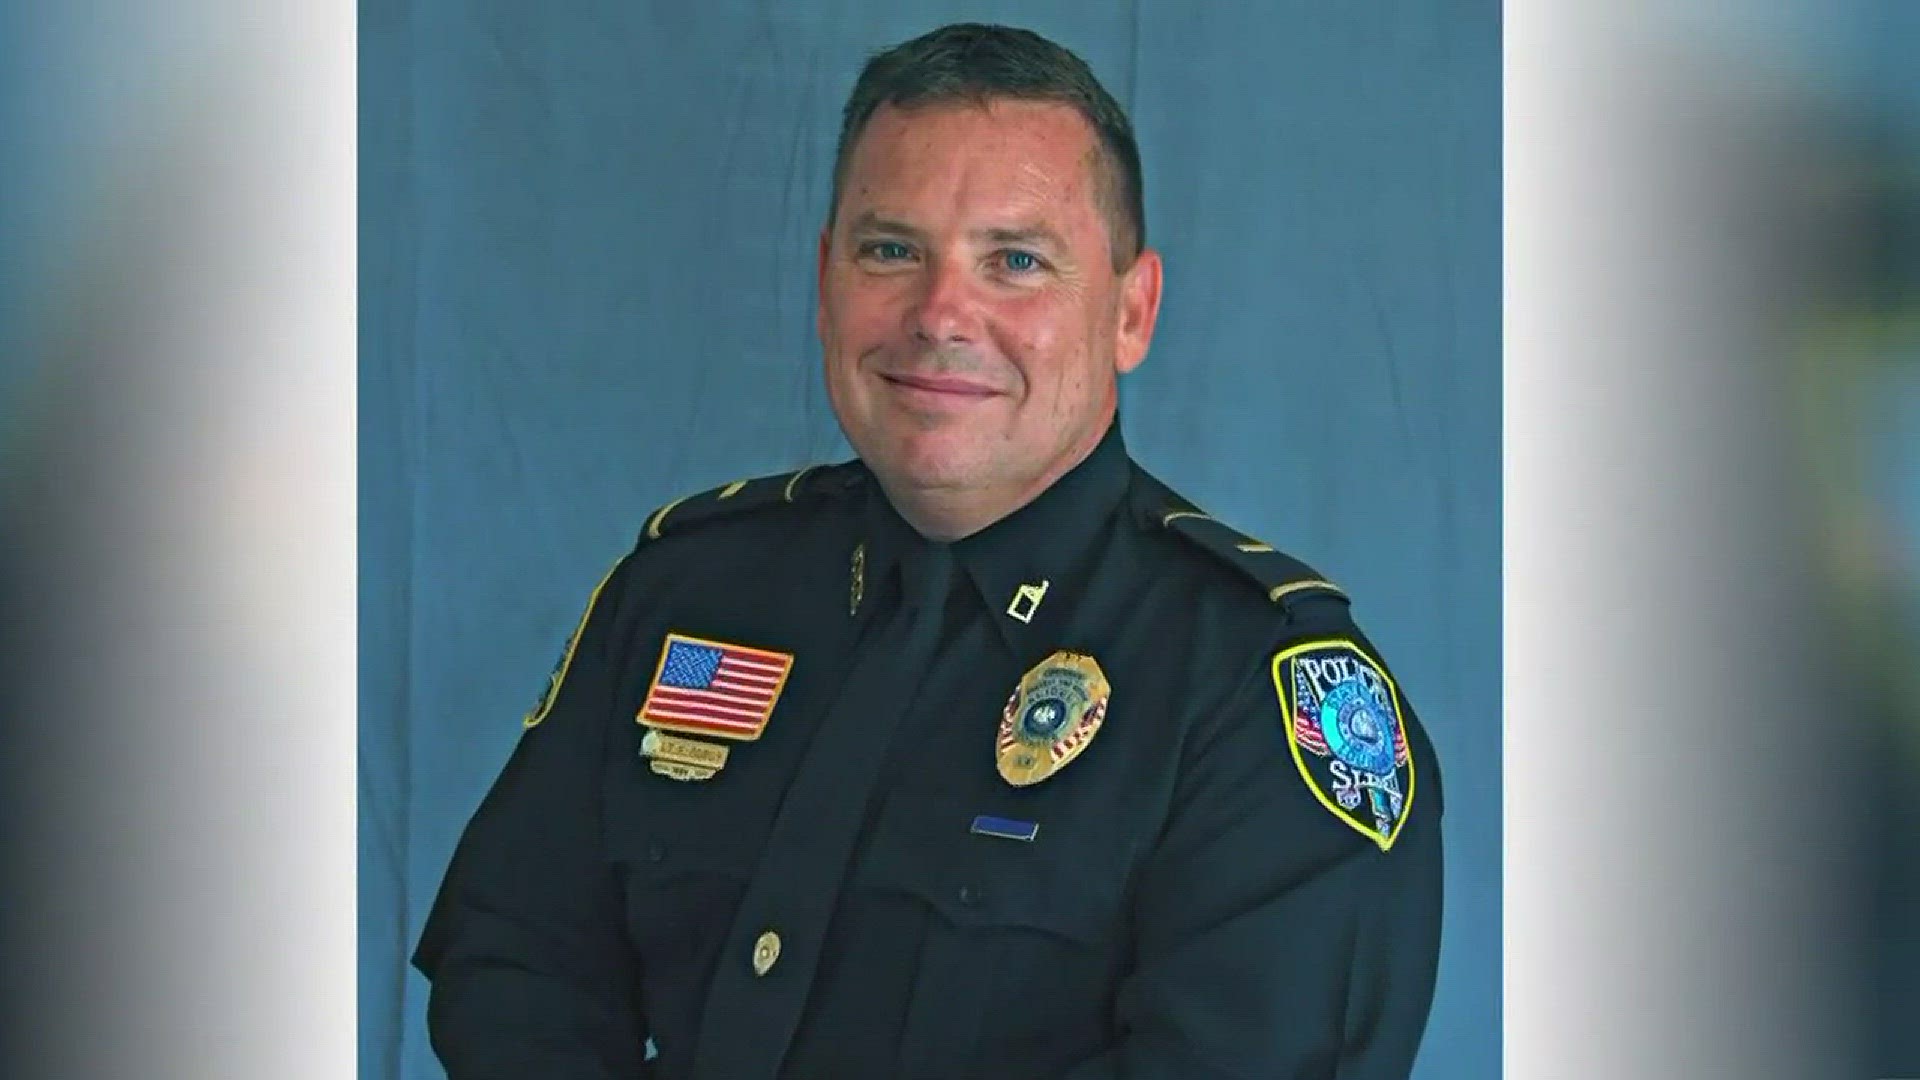 "Lieutenant Ray Dupuy was a dedicated public servant who served and protected the citizens of Slidell for over two decades," stated Slidell Police Chief Randy Fandal in an announcement Thursday. "Please keep Lieutenant Dupuy's family and friends in your t